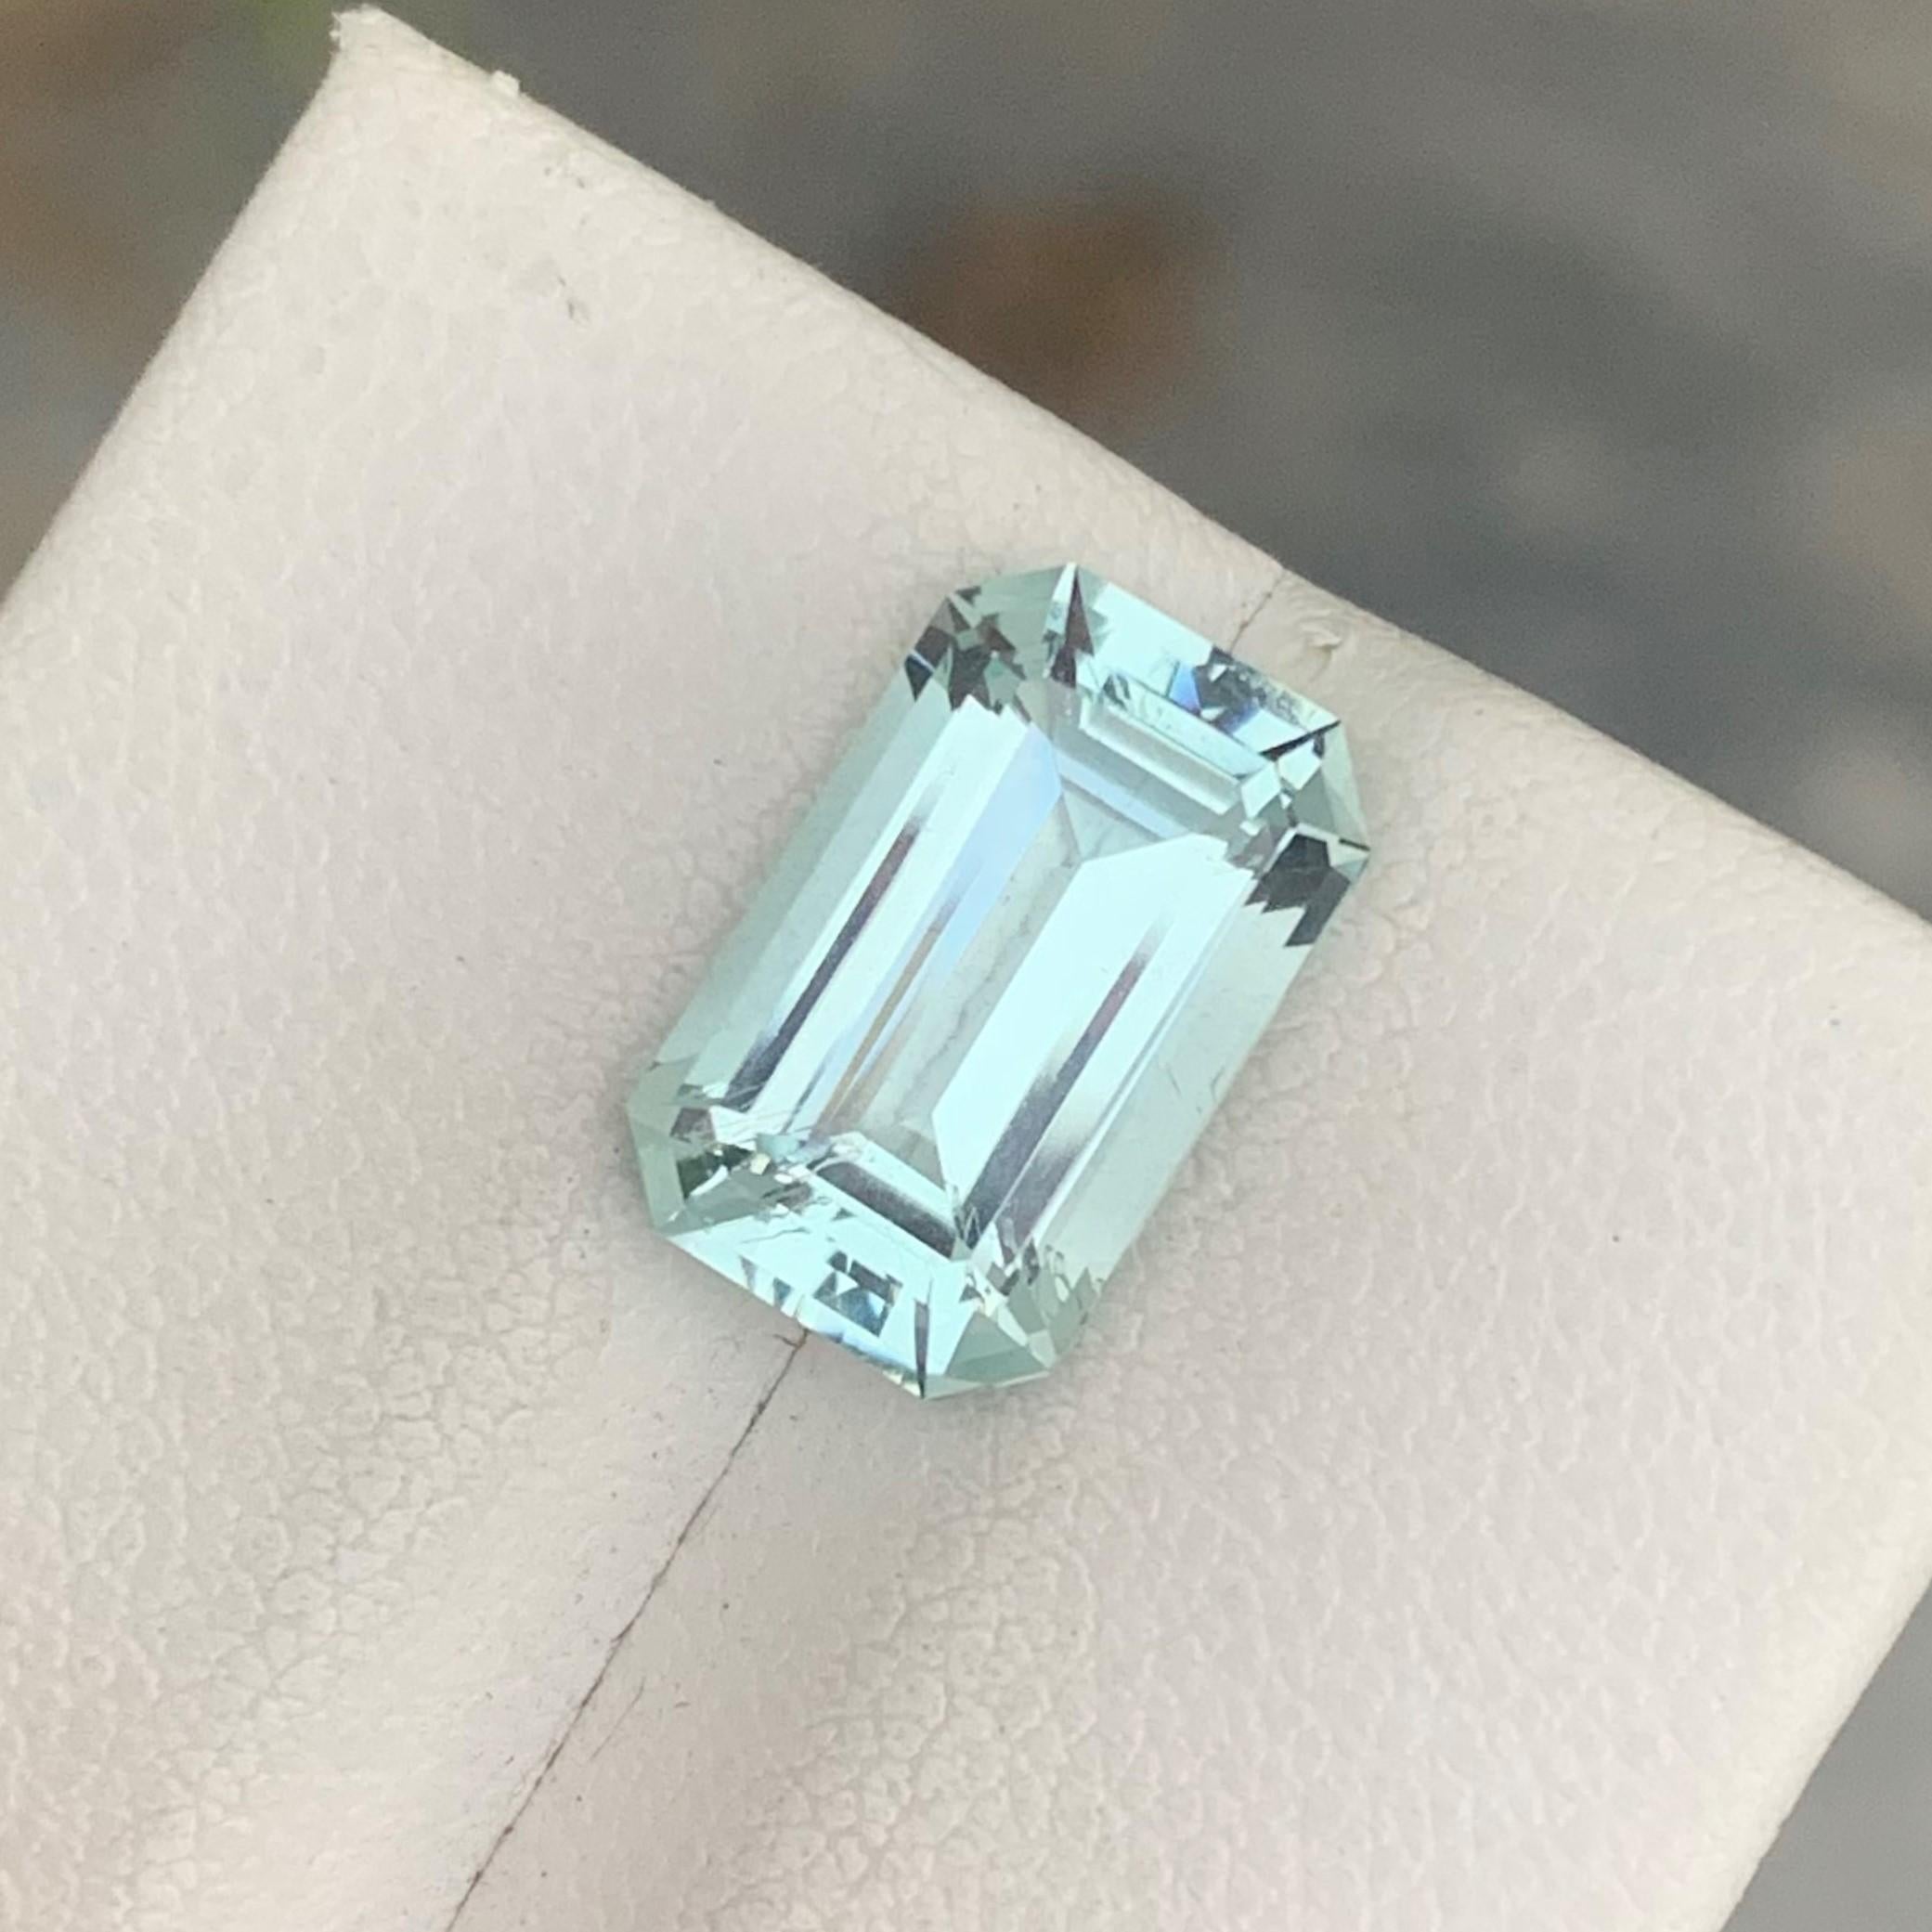 Faceted Aquamarine
Weight: 3.30 Carats
Dimension: 11.8x7.4x5.4 Mm
Origin: Shigar Valley Pakistan
Color: Light Blue
Birth Month: March
Treatment: Non
Certificate: On Demand
Some basic benefits of wearing Aquamarine Gemstone:
Attracts money.
Brings